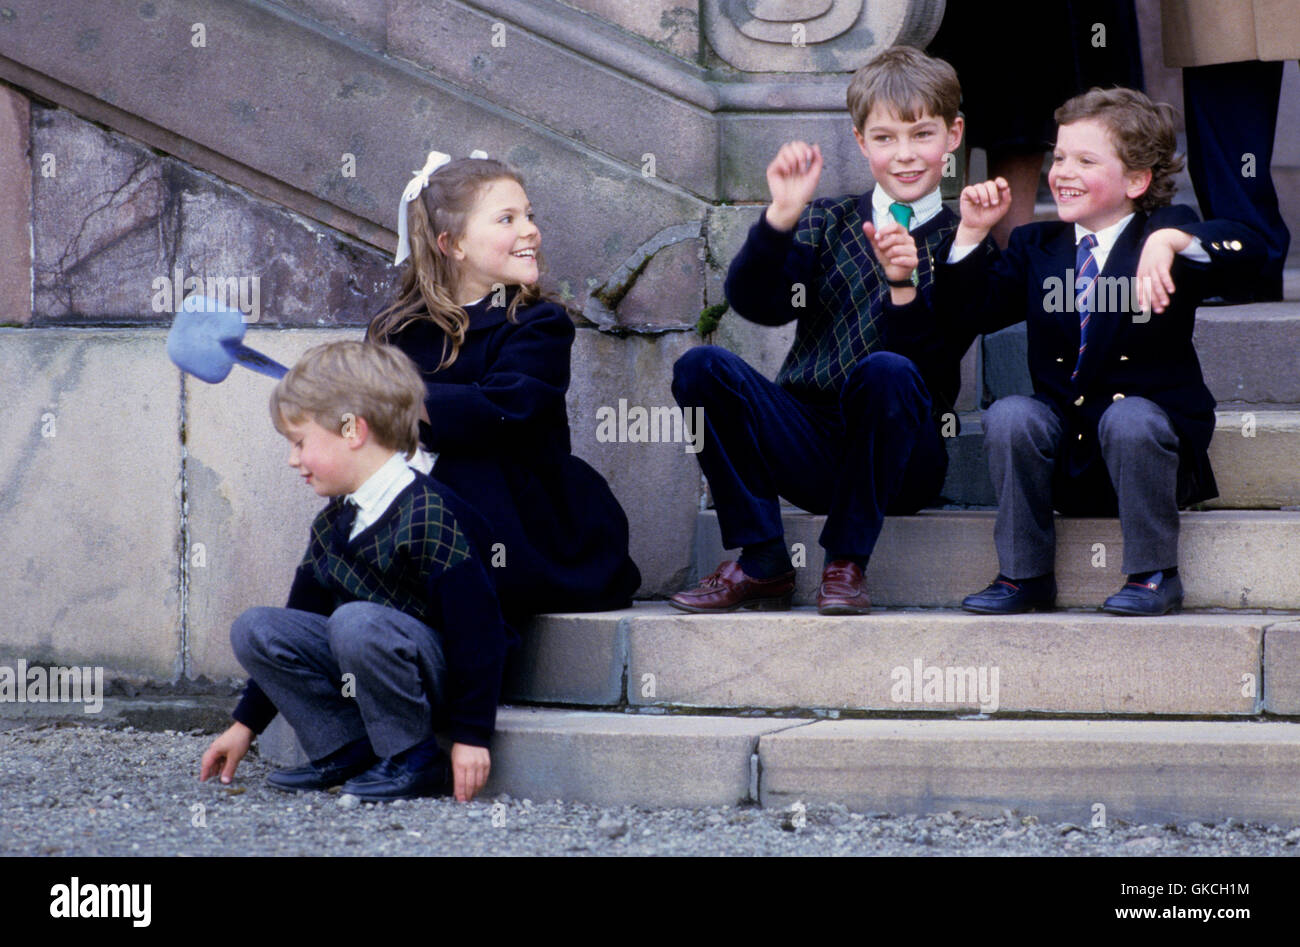 crown-princess-victoria-with-brother-carl-philip-and-cousins-gustav-GKCH1M.jpg